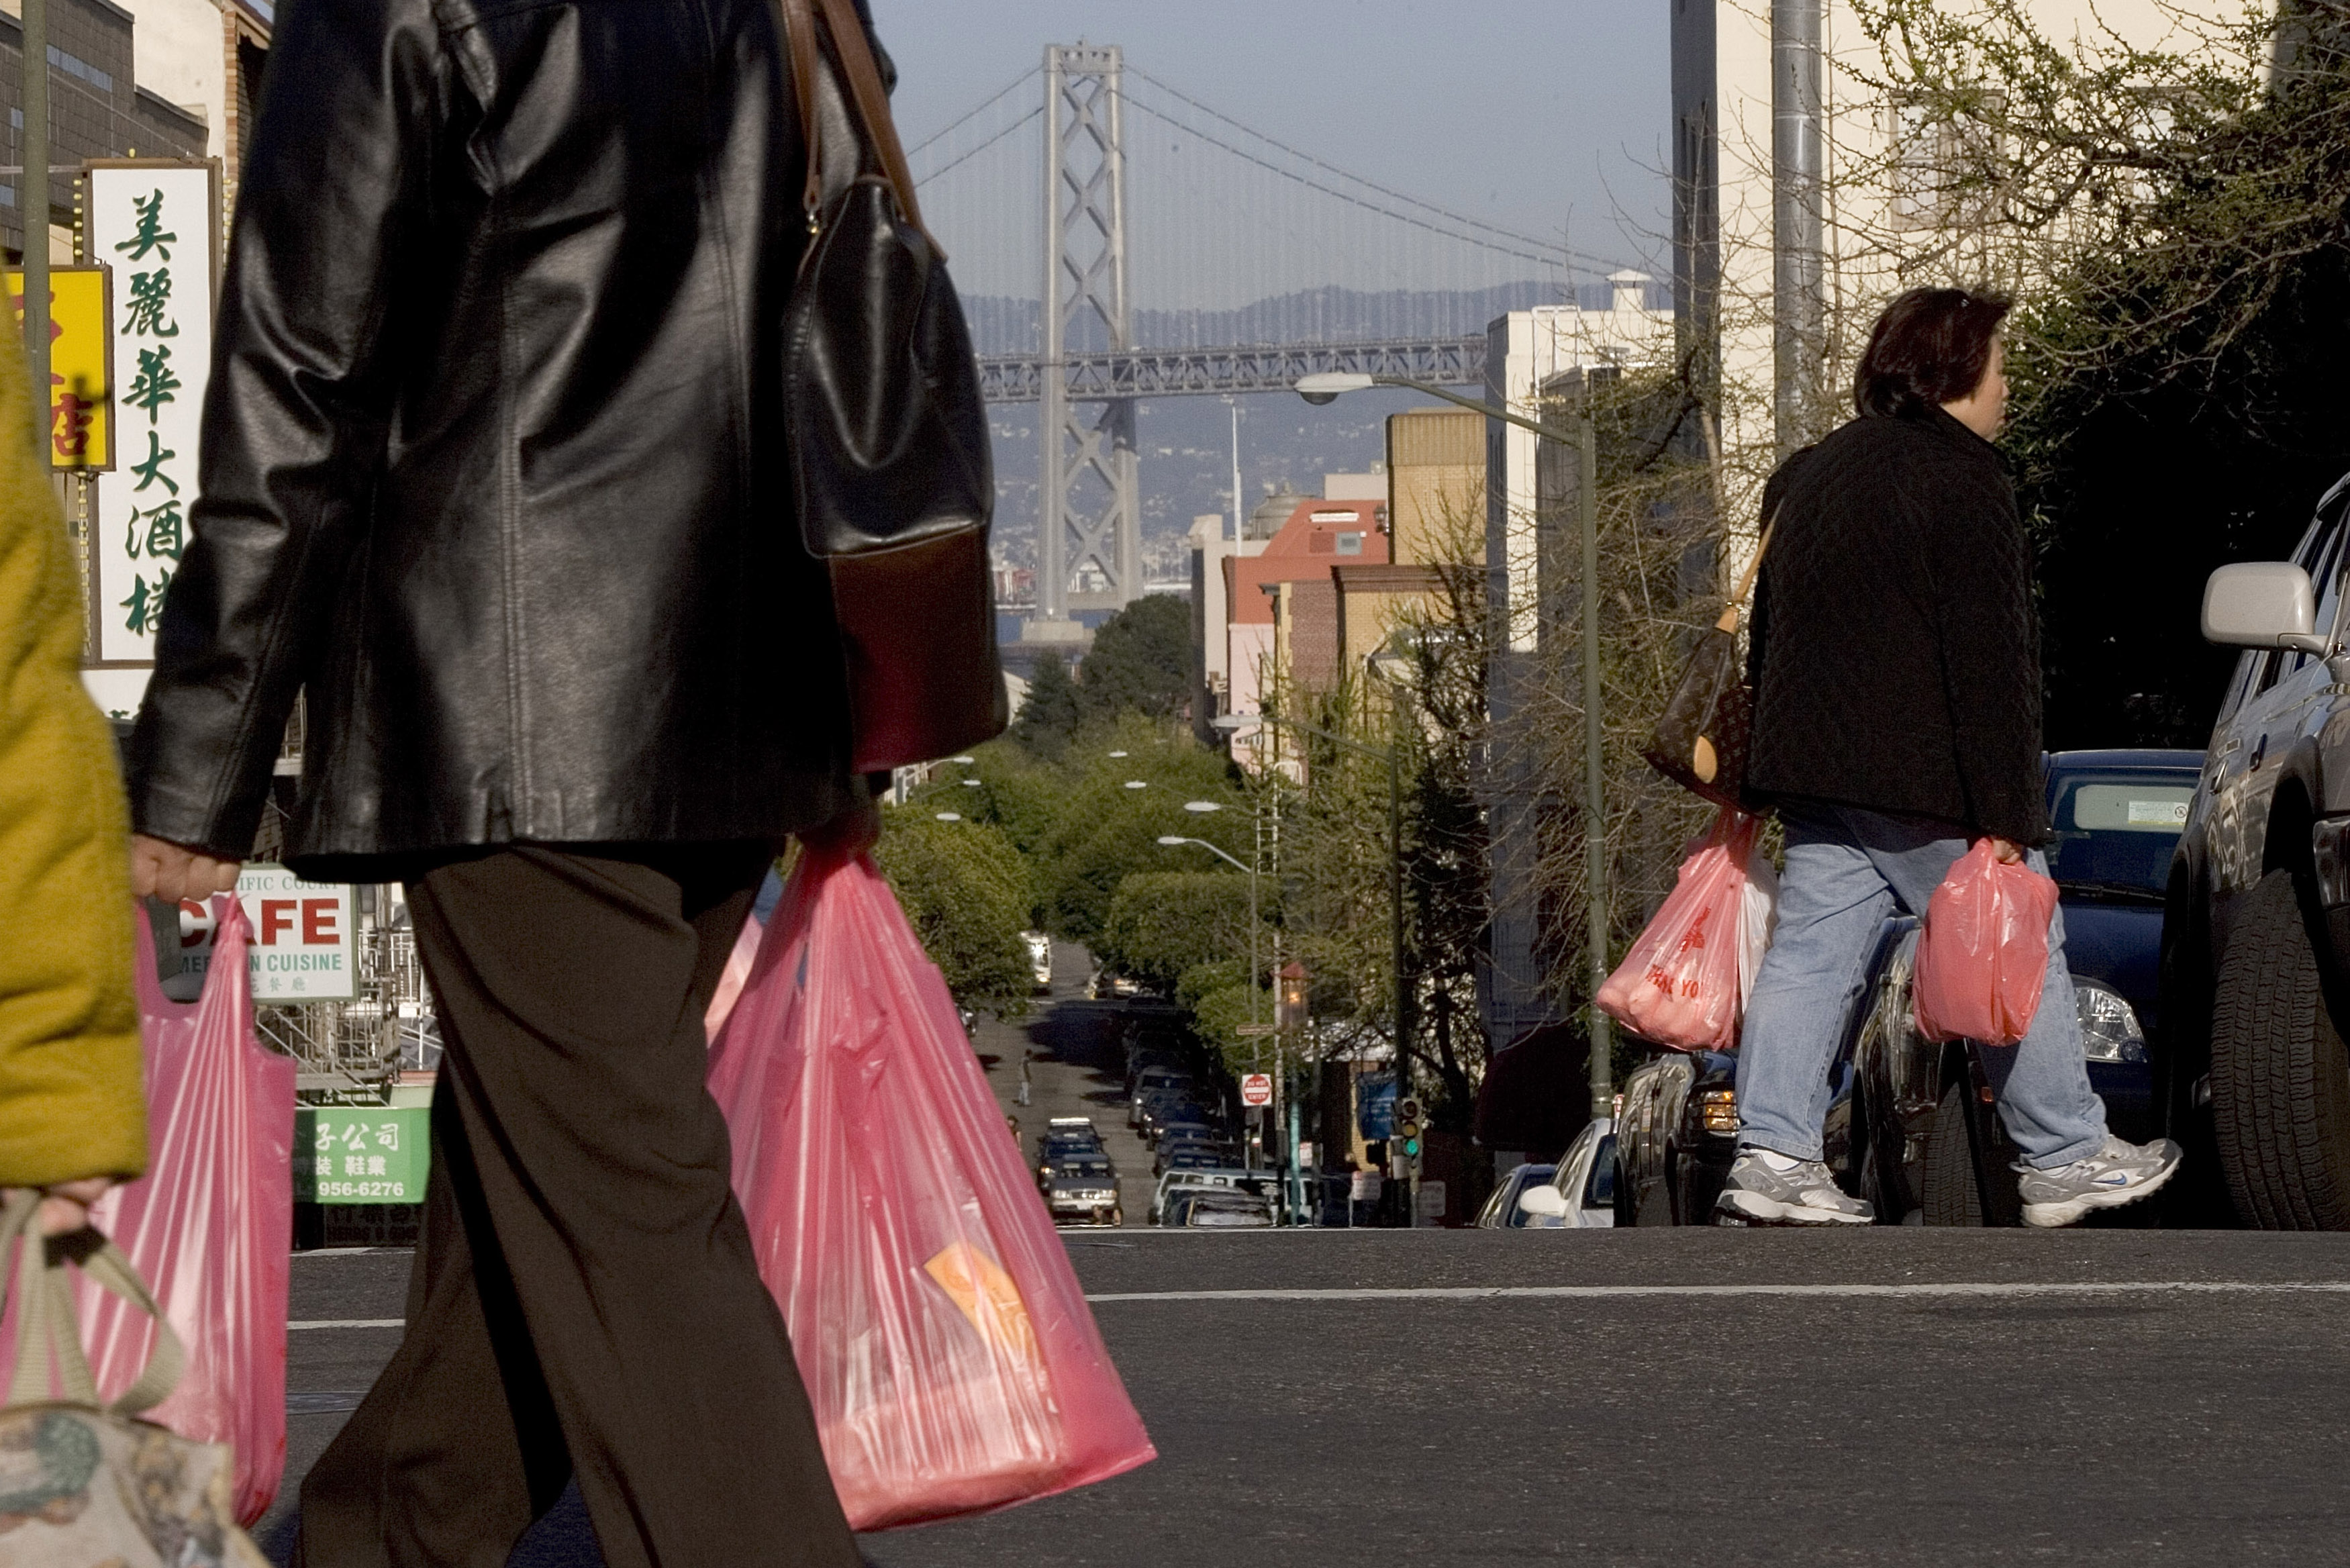 People walk with groceries in plastic bags in Chinatown on March 28, 2007 in San Francisco, (Photo by David Paul Morris/Getty Images)